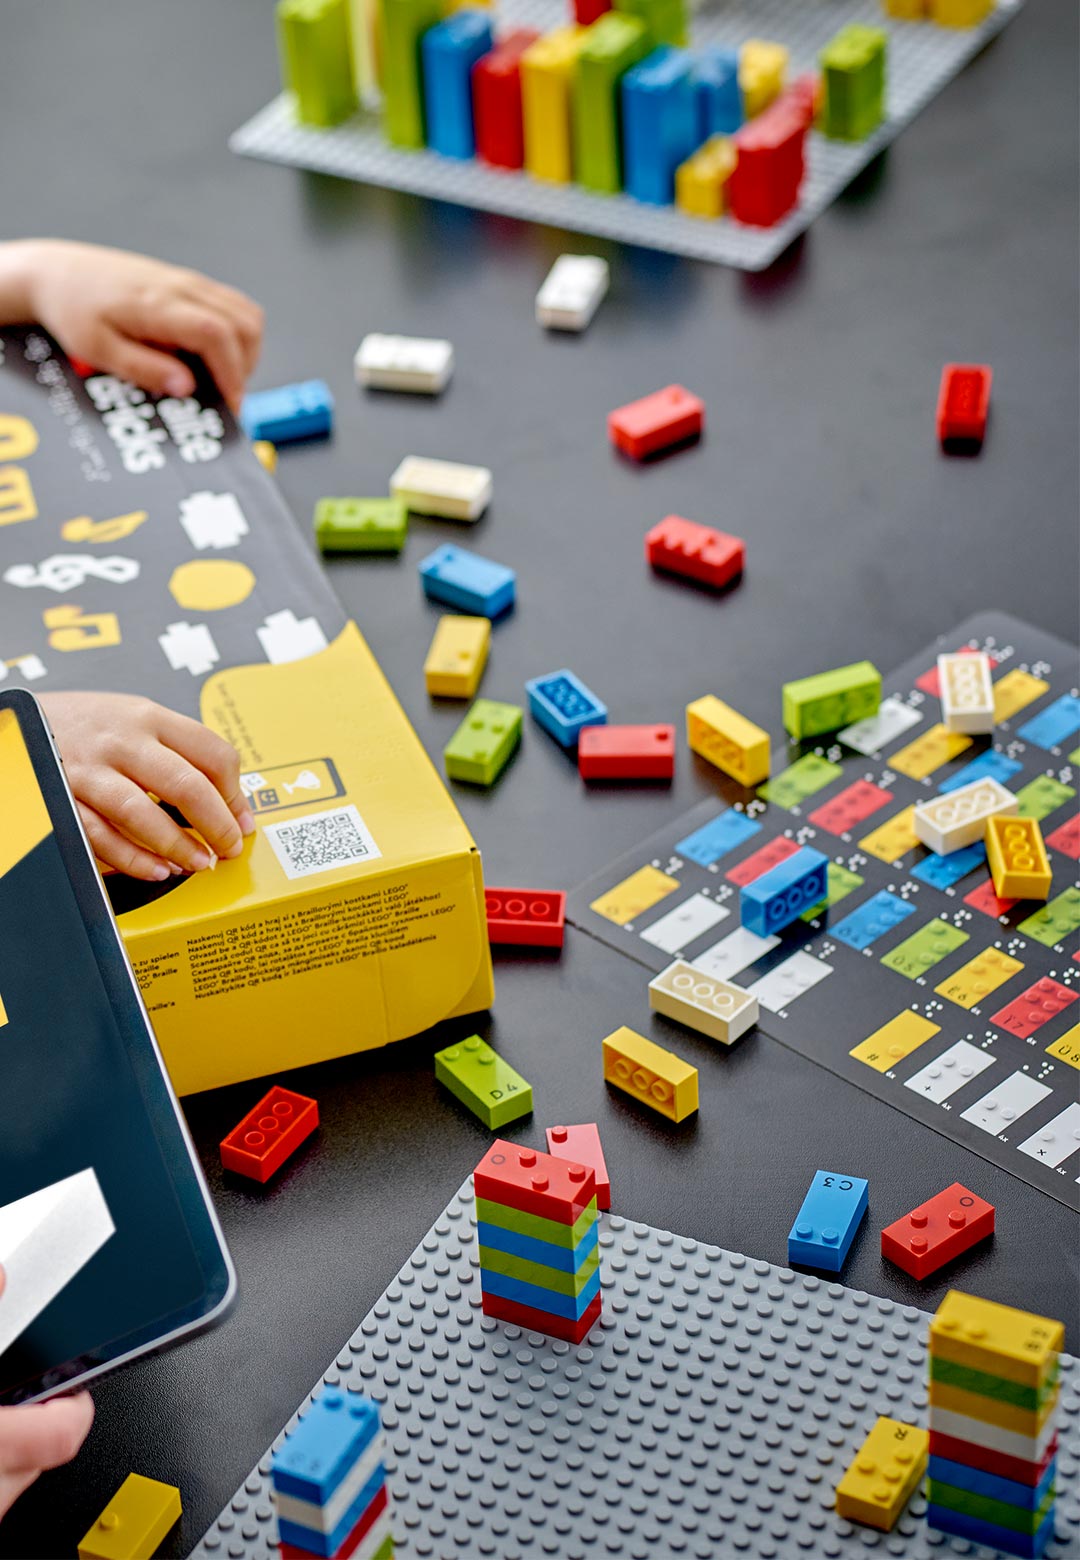 LEGO bridges play, learning, and inclusivity with its innovative braille bricks